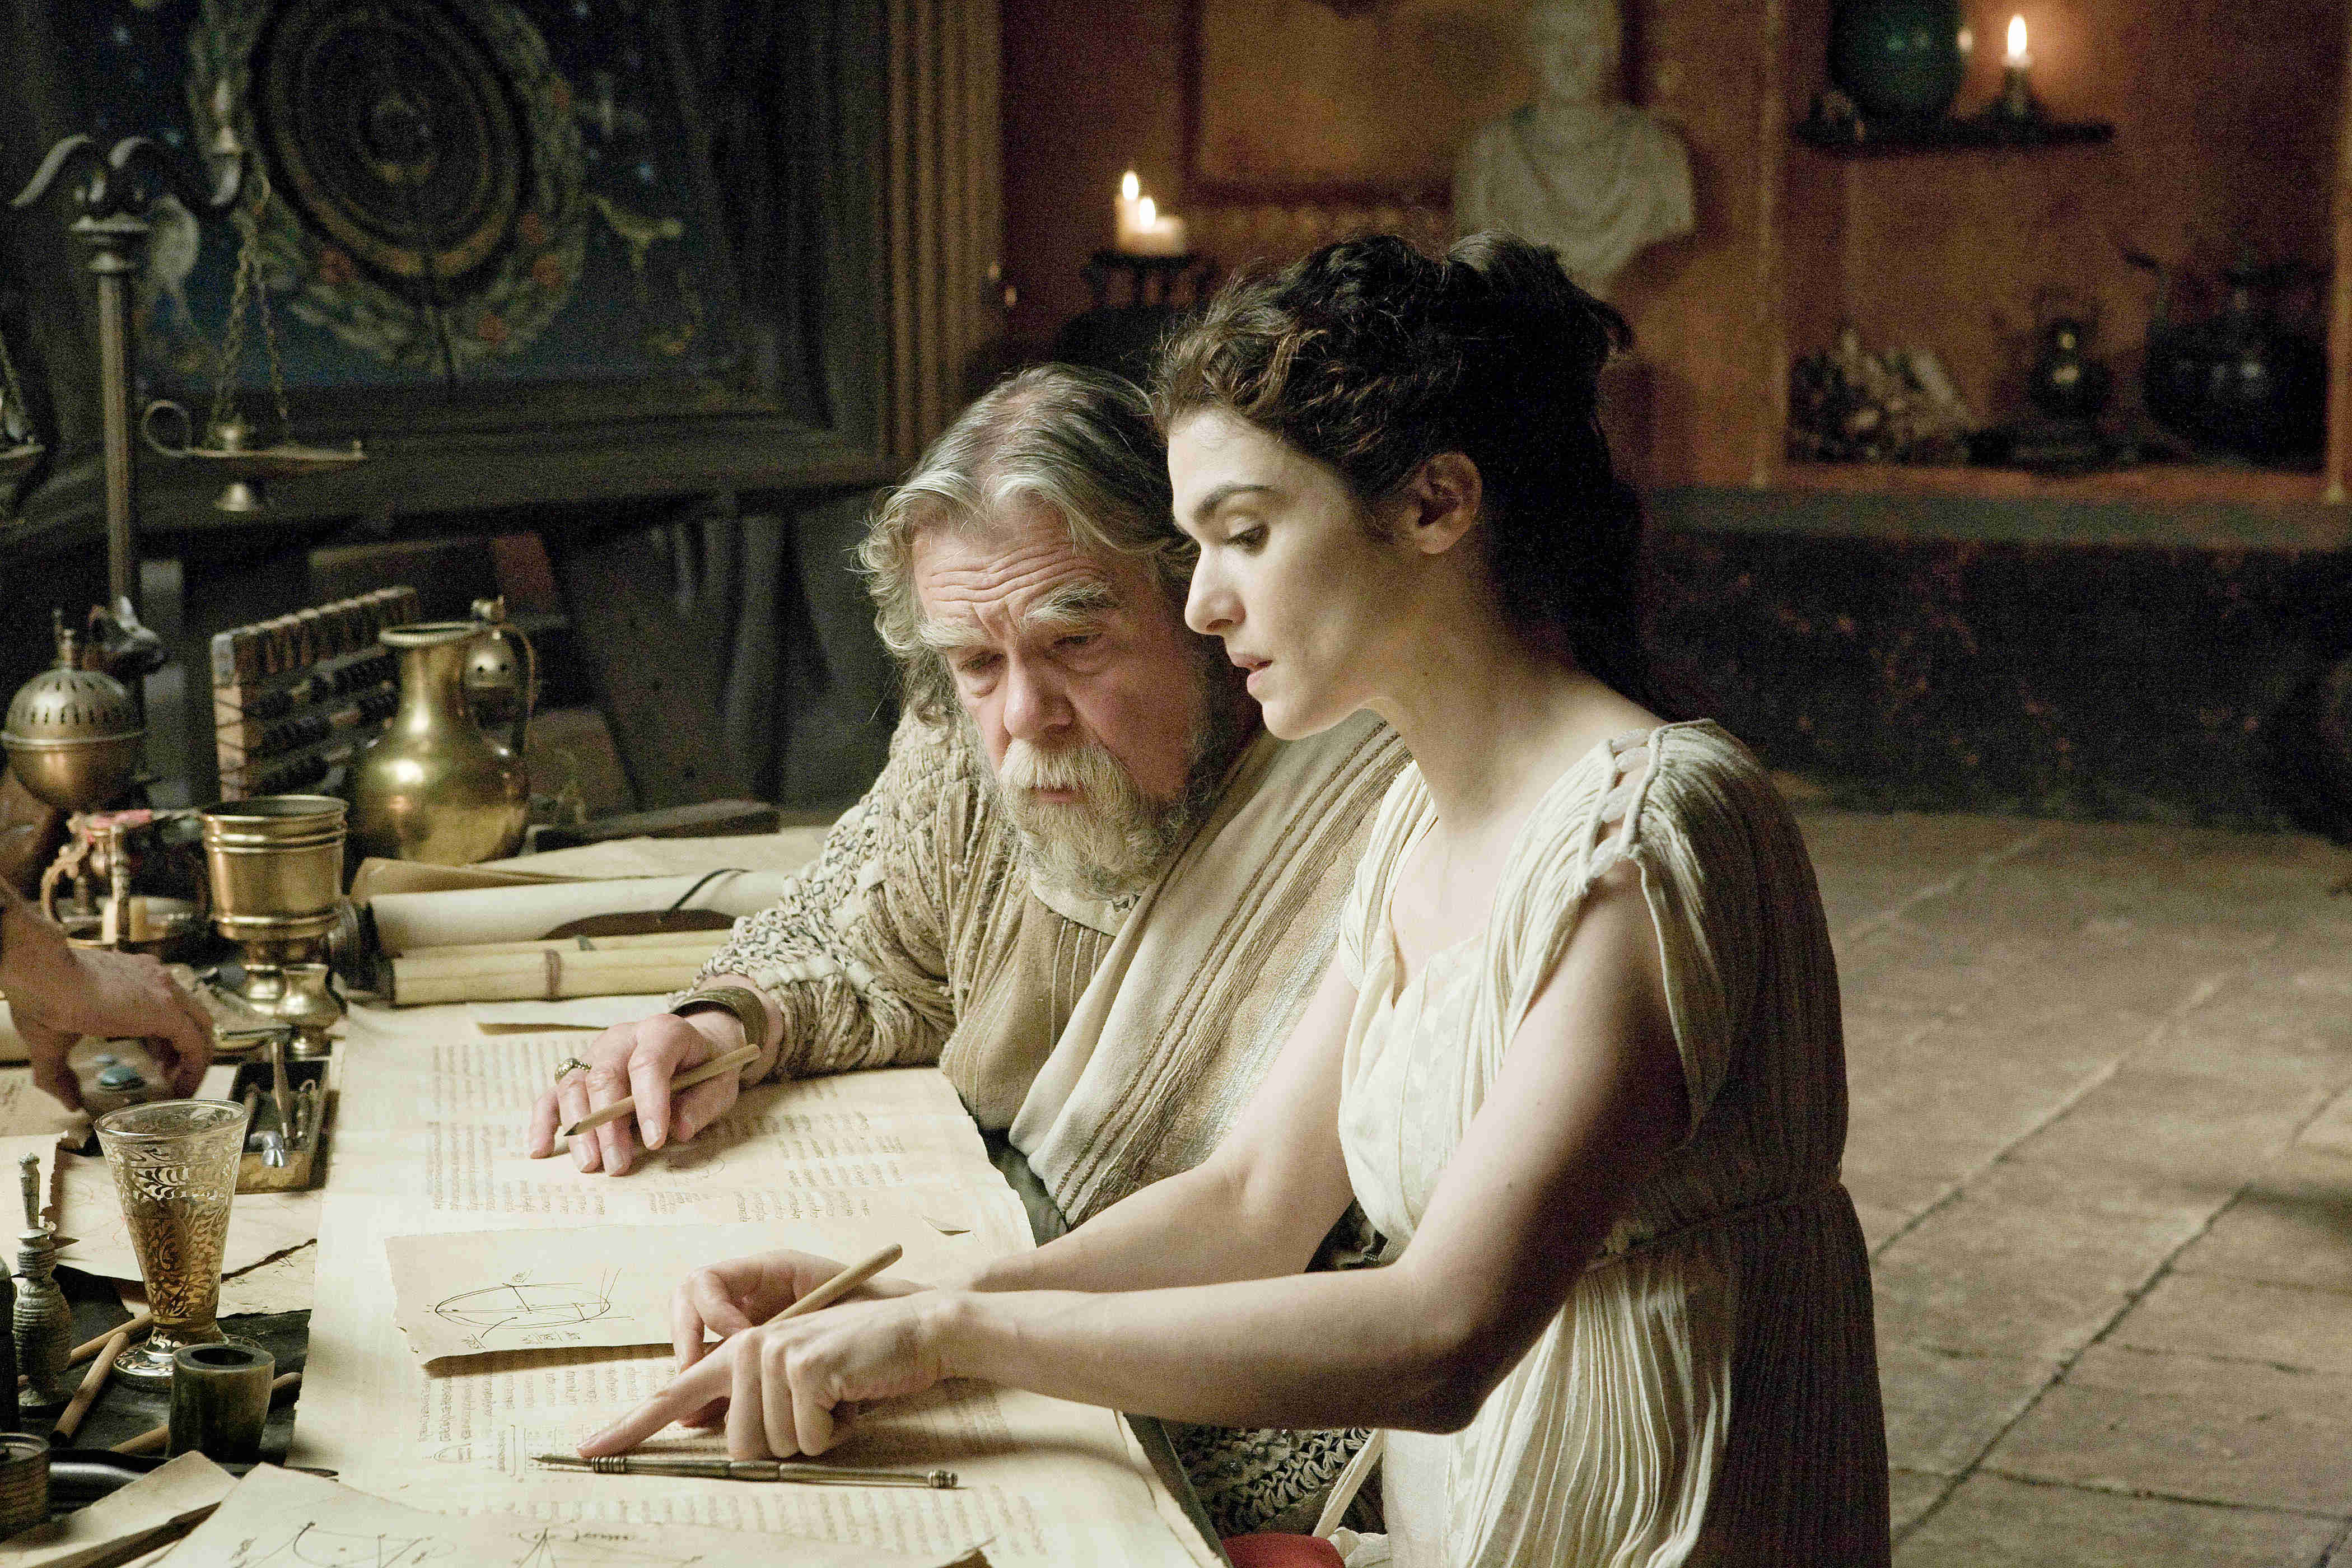 Michael Lonsdale stars as Theon and Rachel Weisz stars as Hypatia in Newmarket Films' Agora (2010)